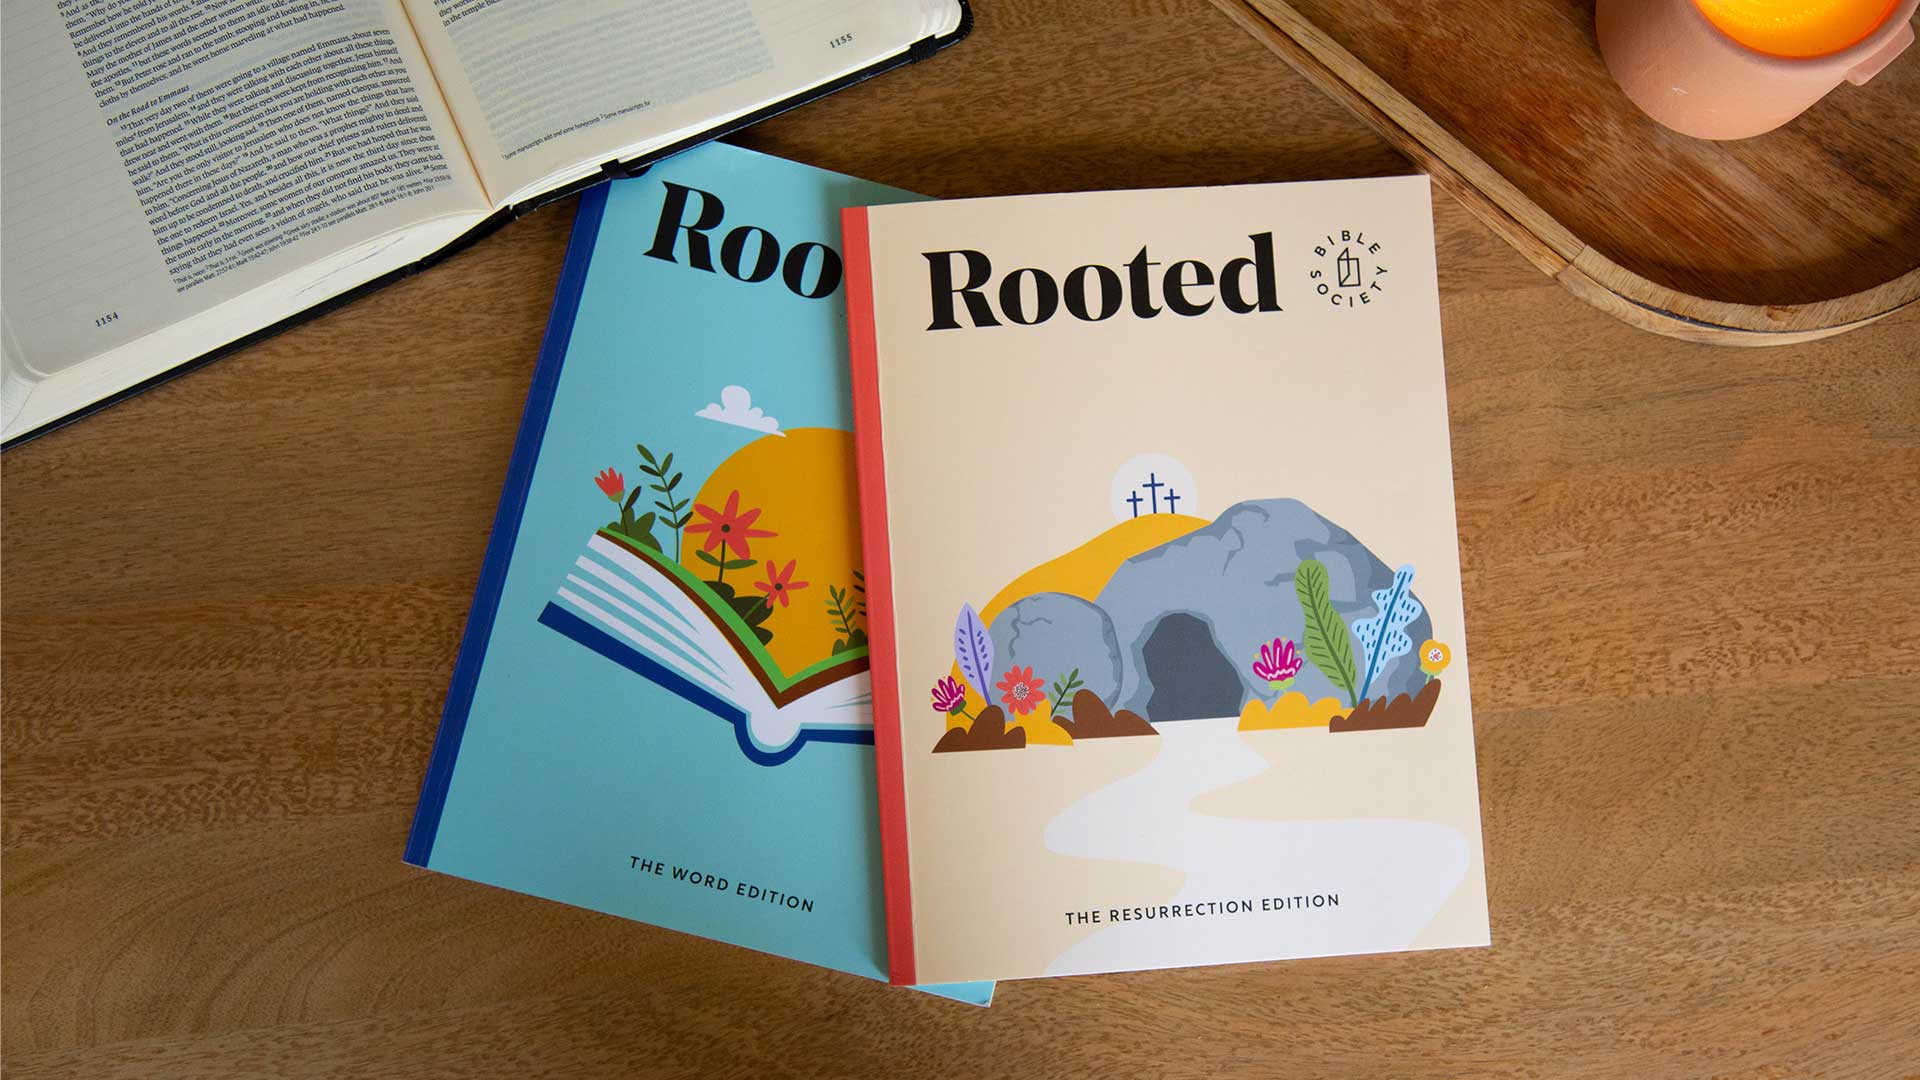 Rooted is the creative devotional journal that helps make the һƷ̳̽available to everyone, everywhere. Get your first journal free when you sign up today.